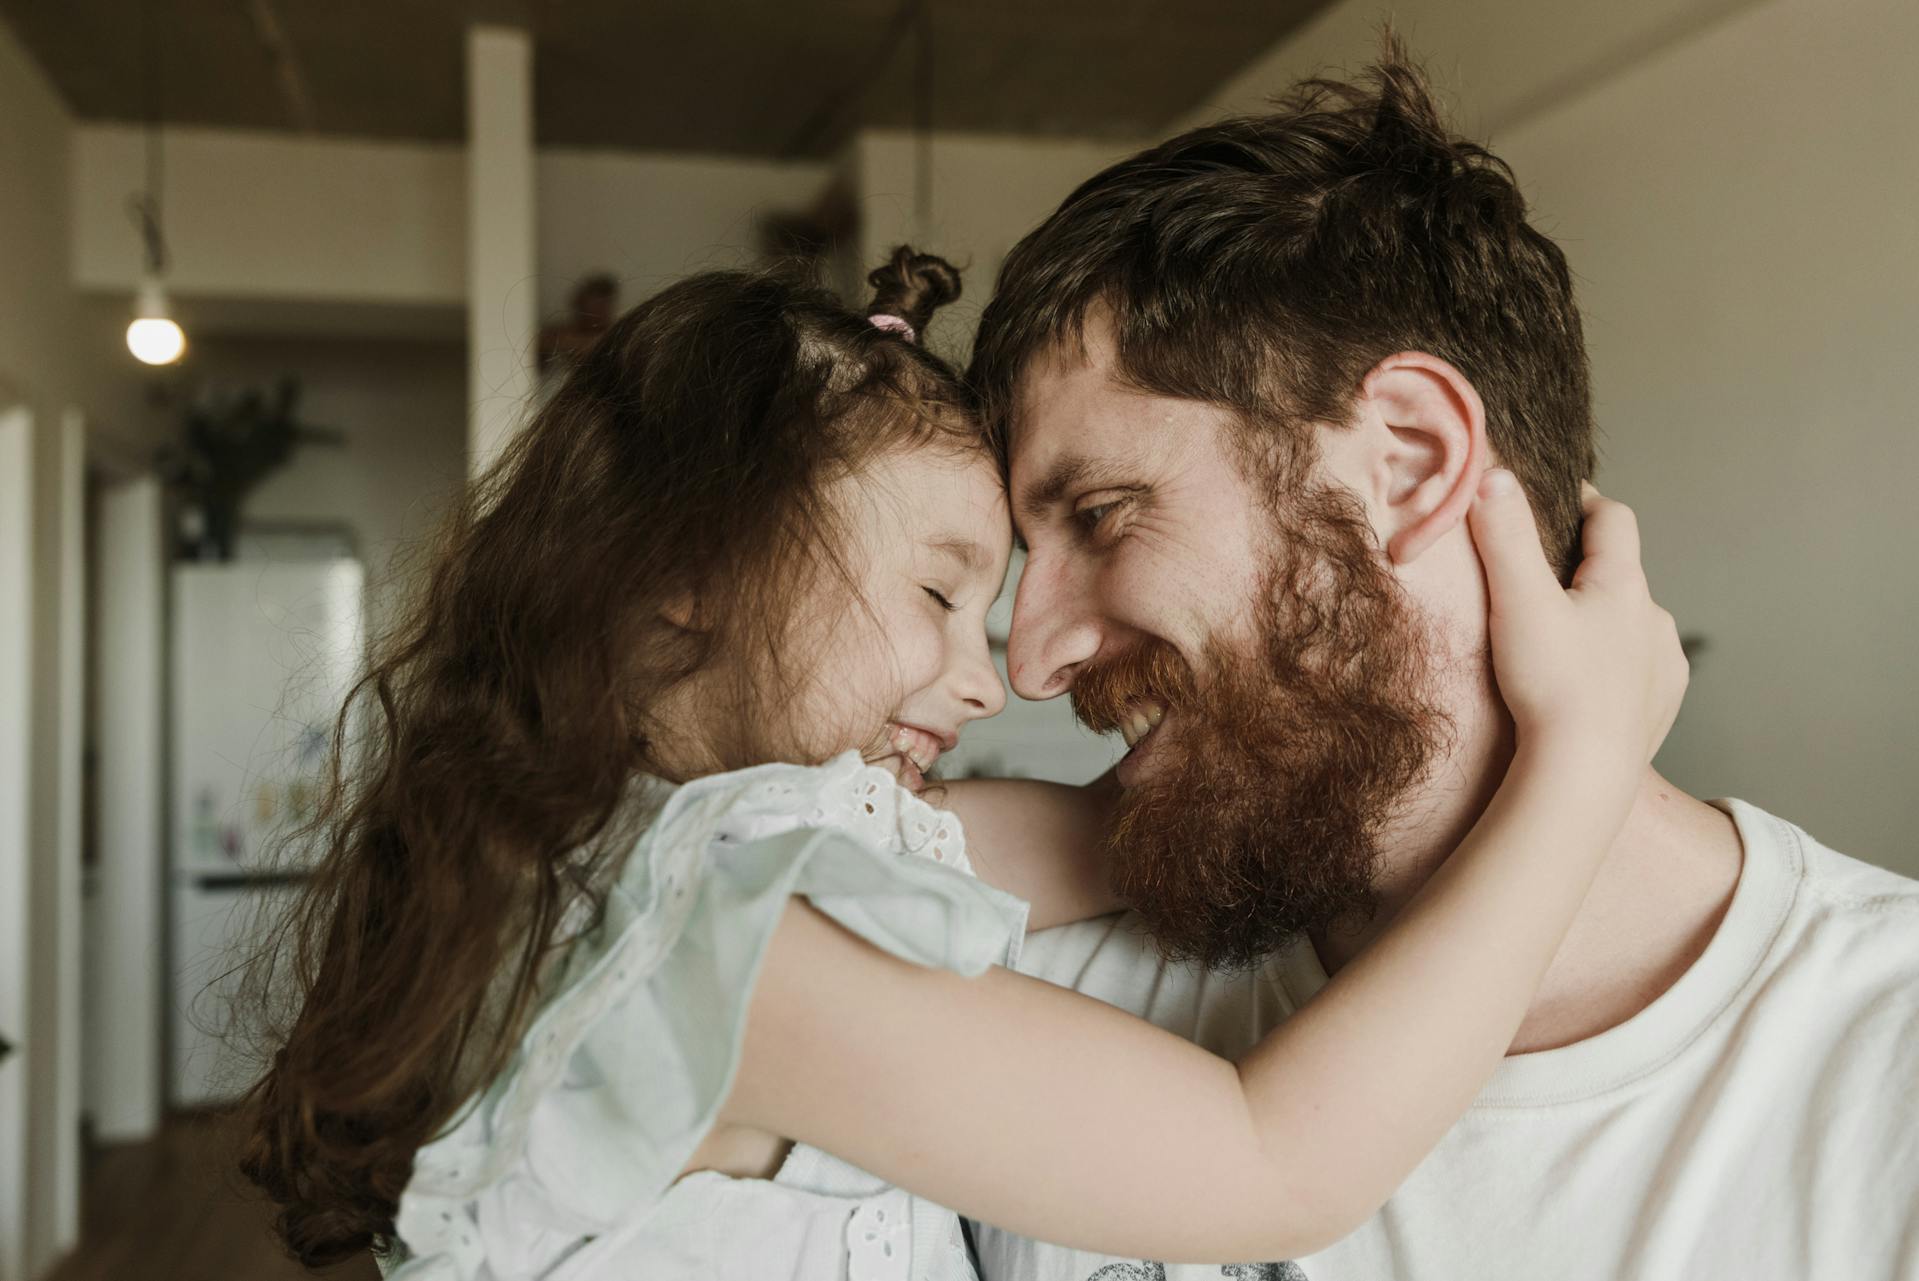 A father and daughter embracing | Source: Pexels